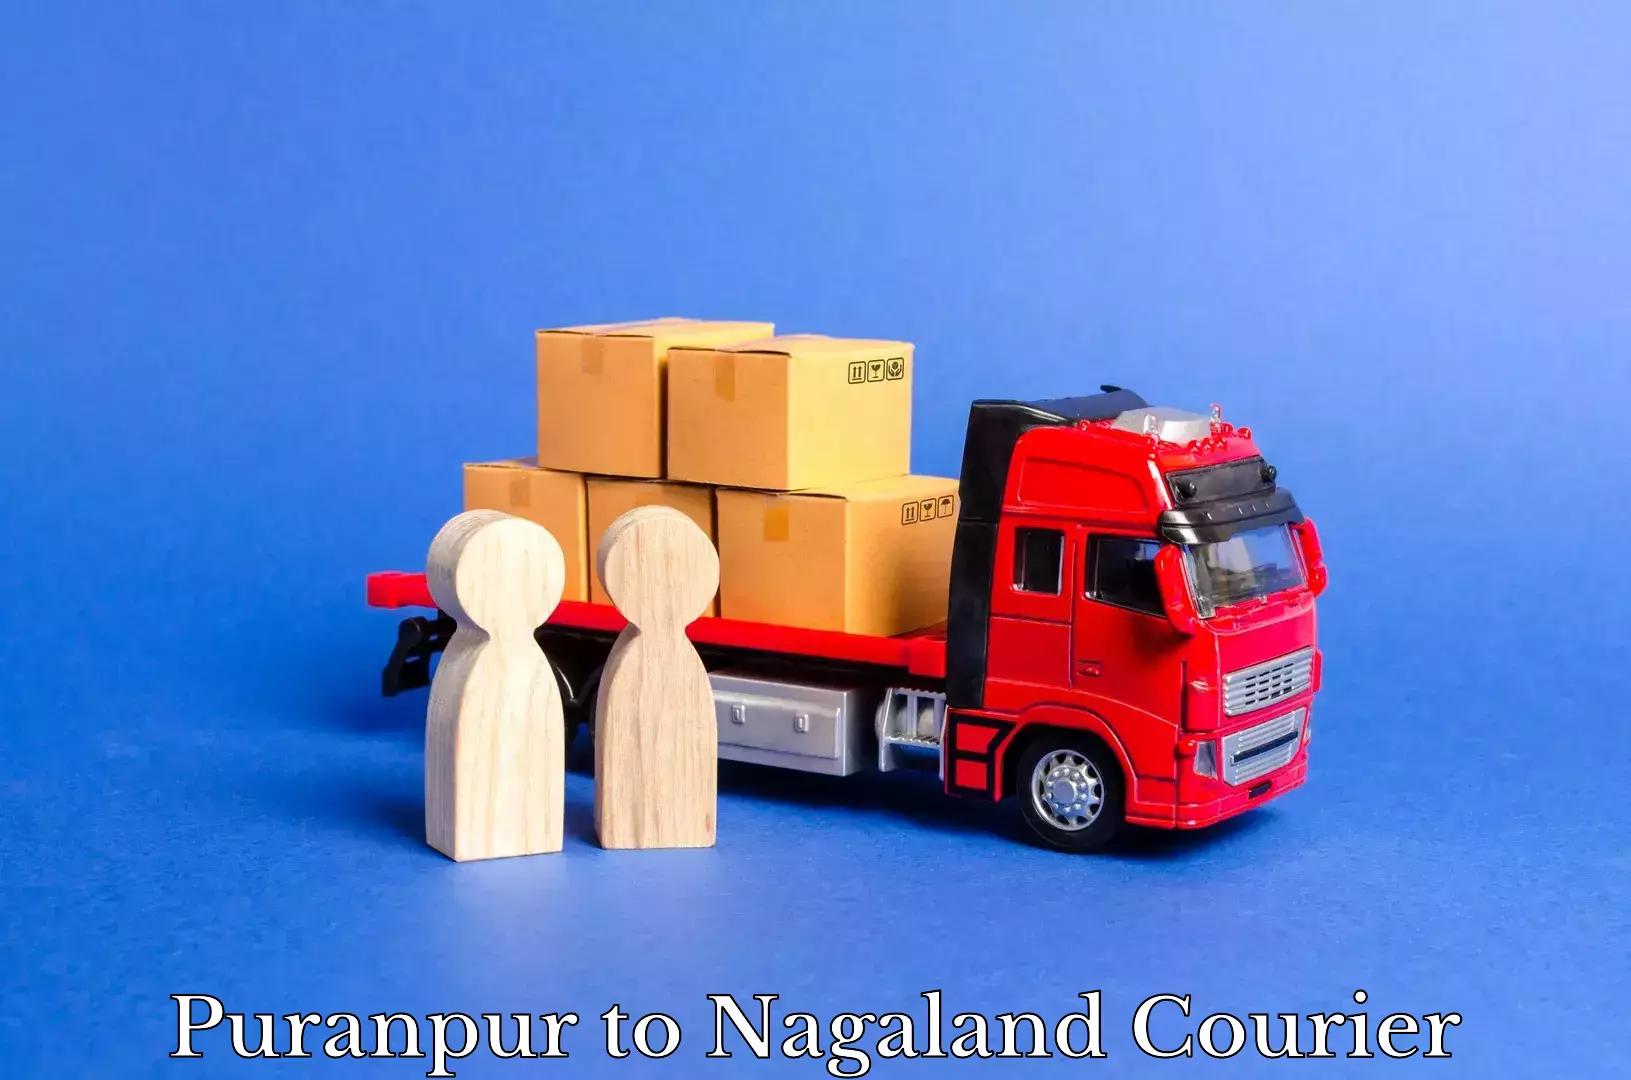 Courier service partnerships in Puranpur to Nagaland